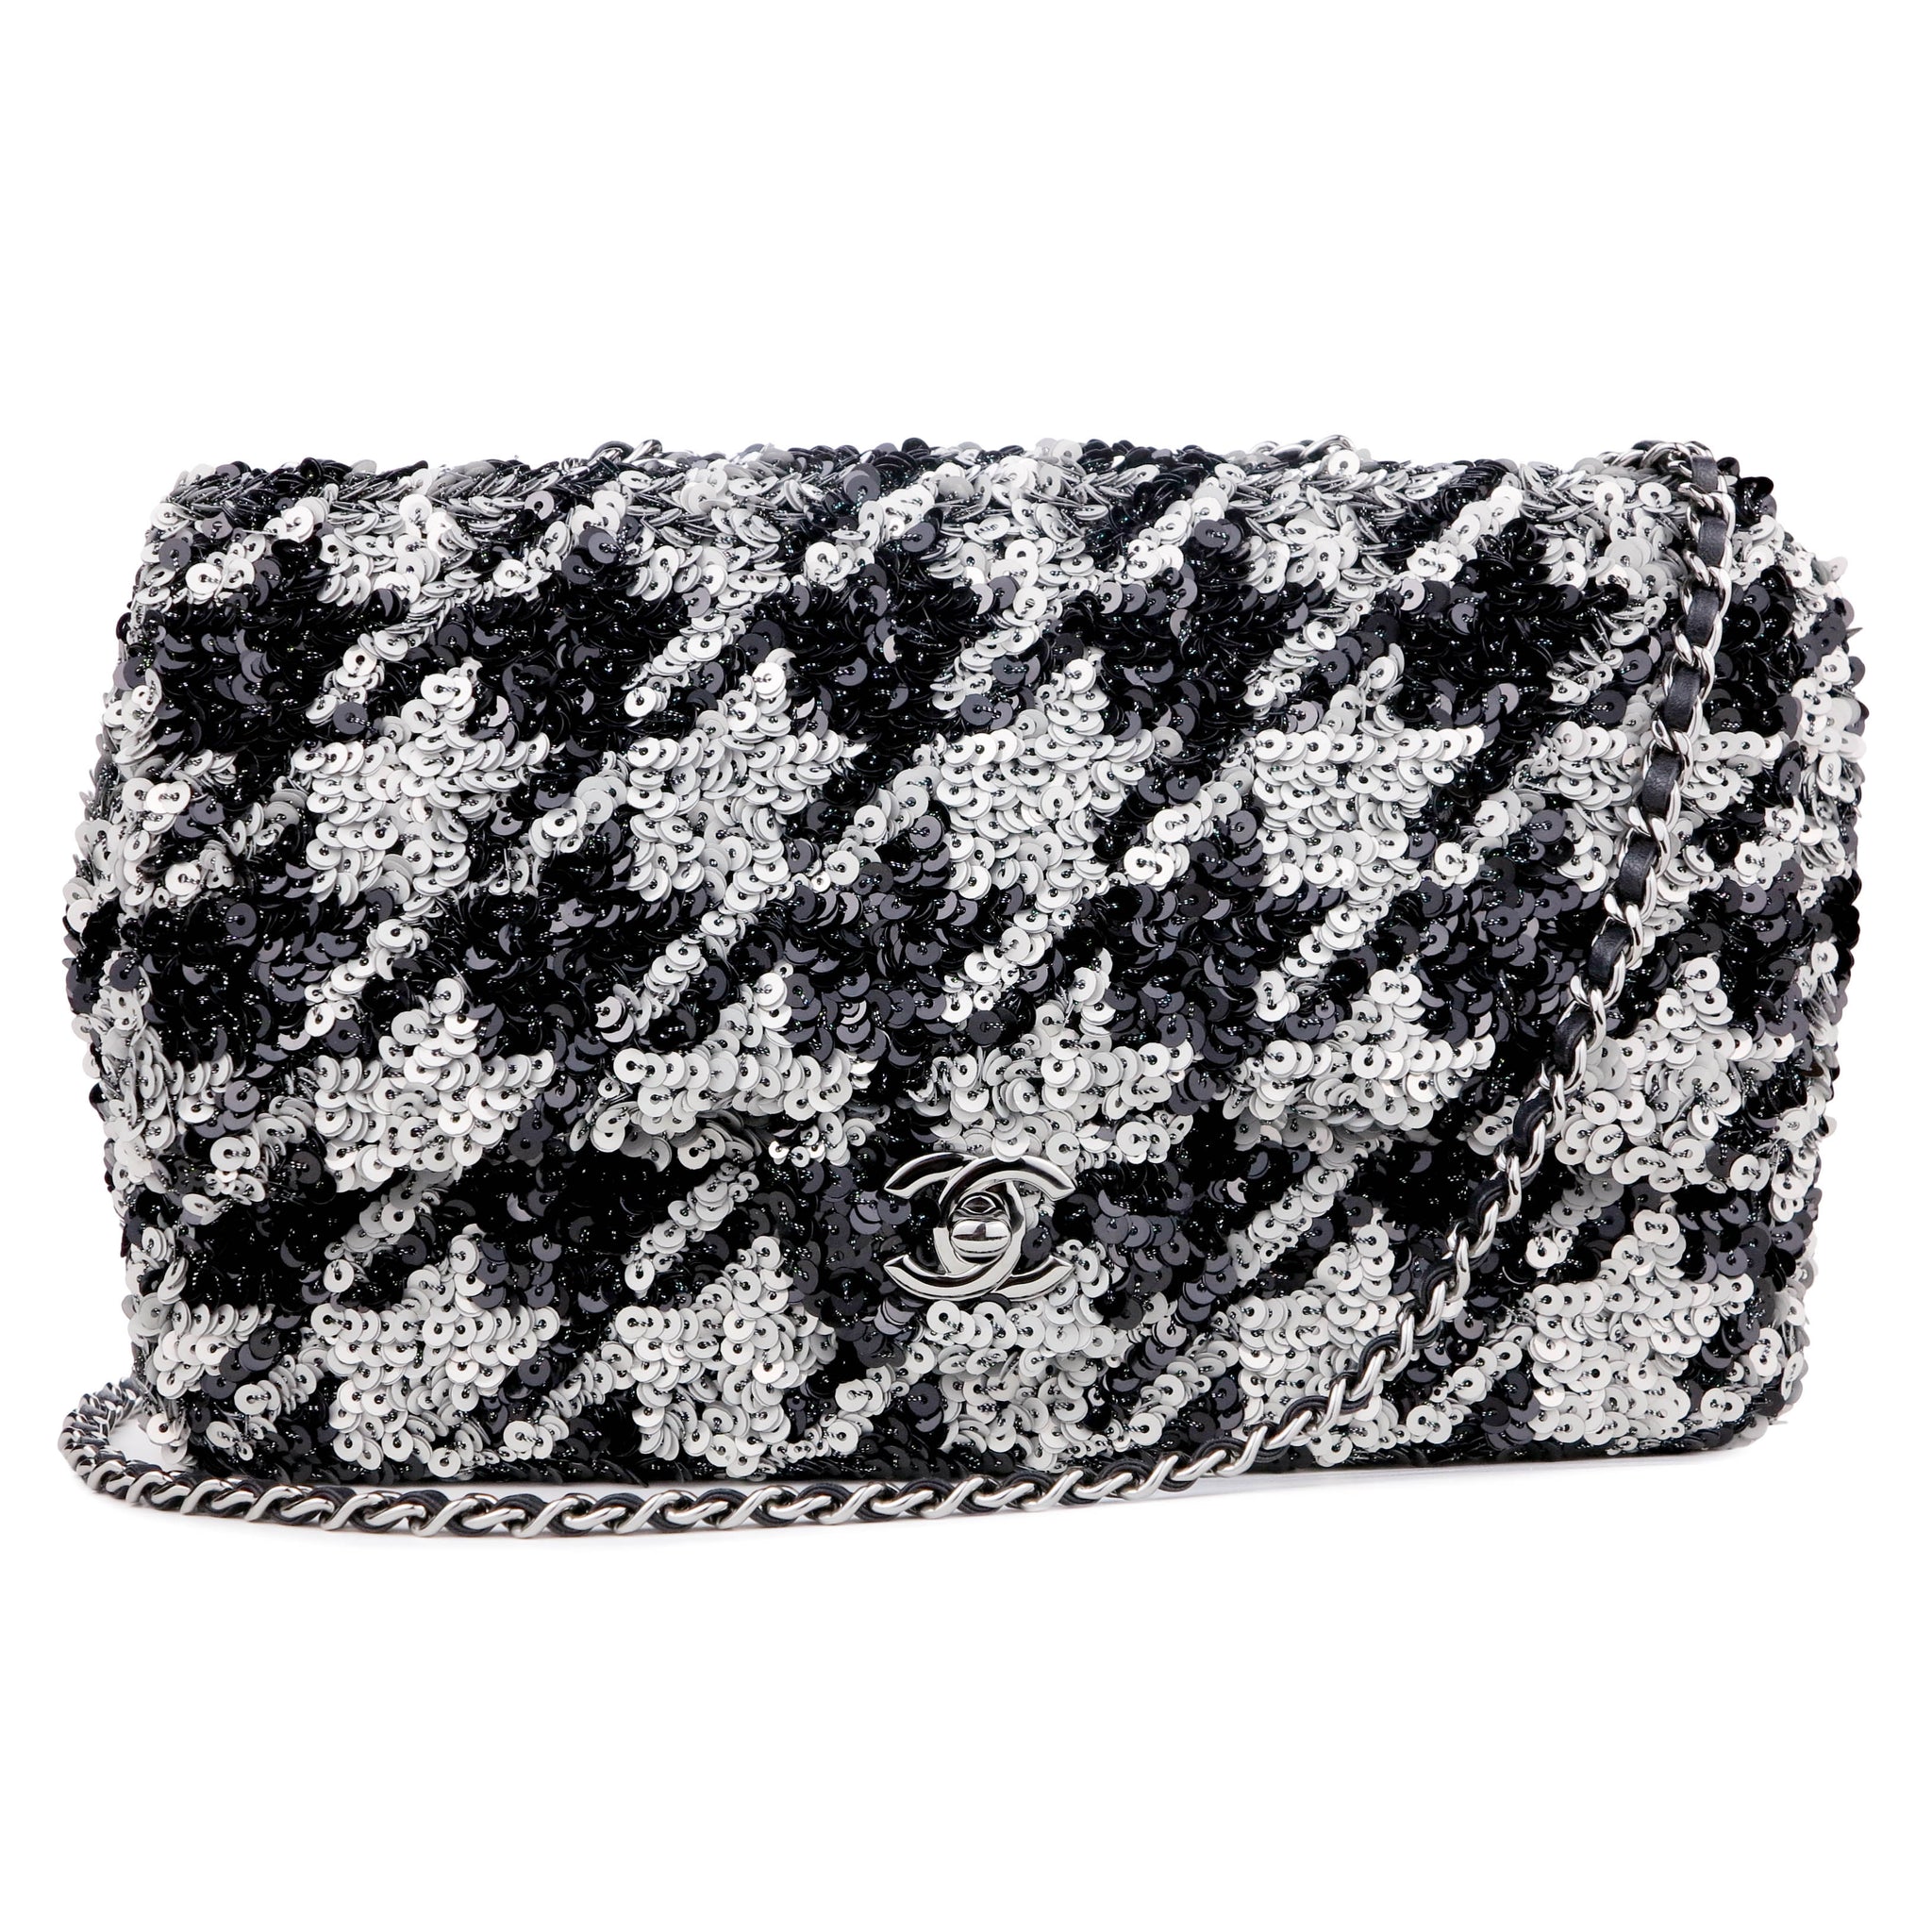 CHANEL Houndstooth Sequin Medium Flap Bag in Silver and Black | Dearluxe